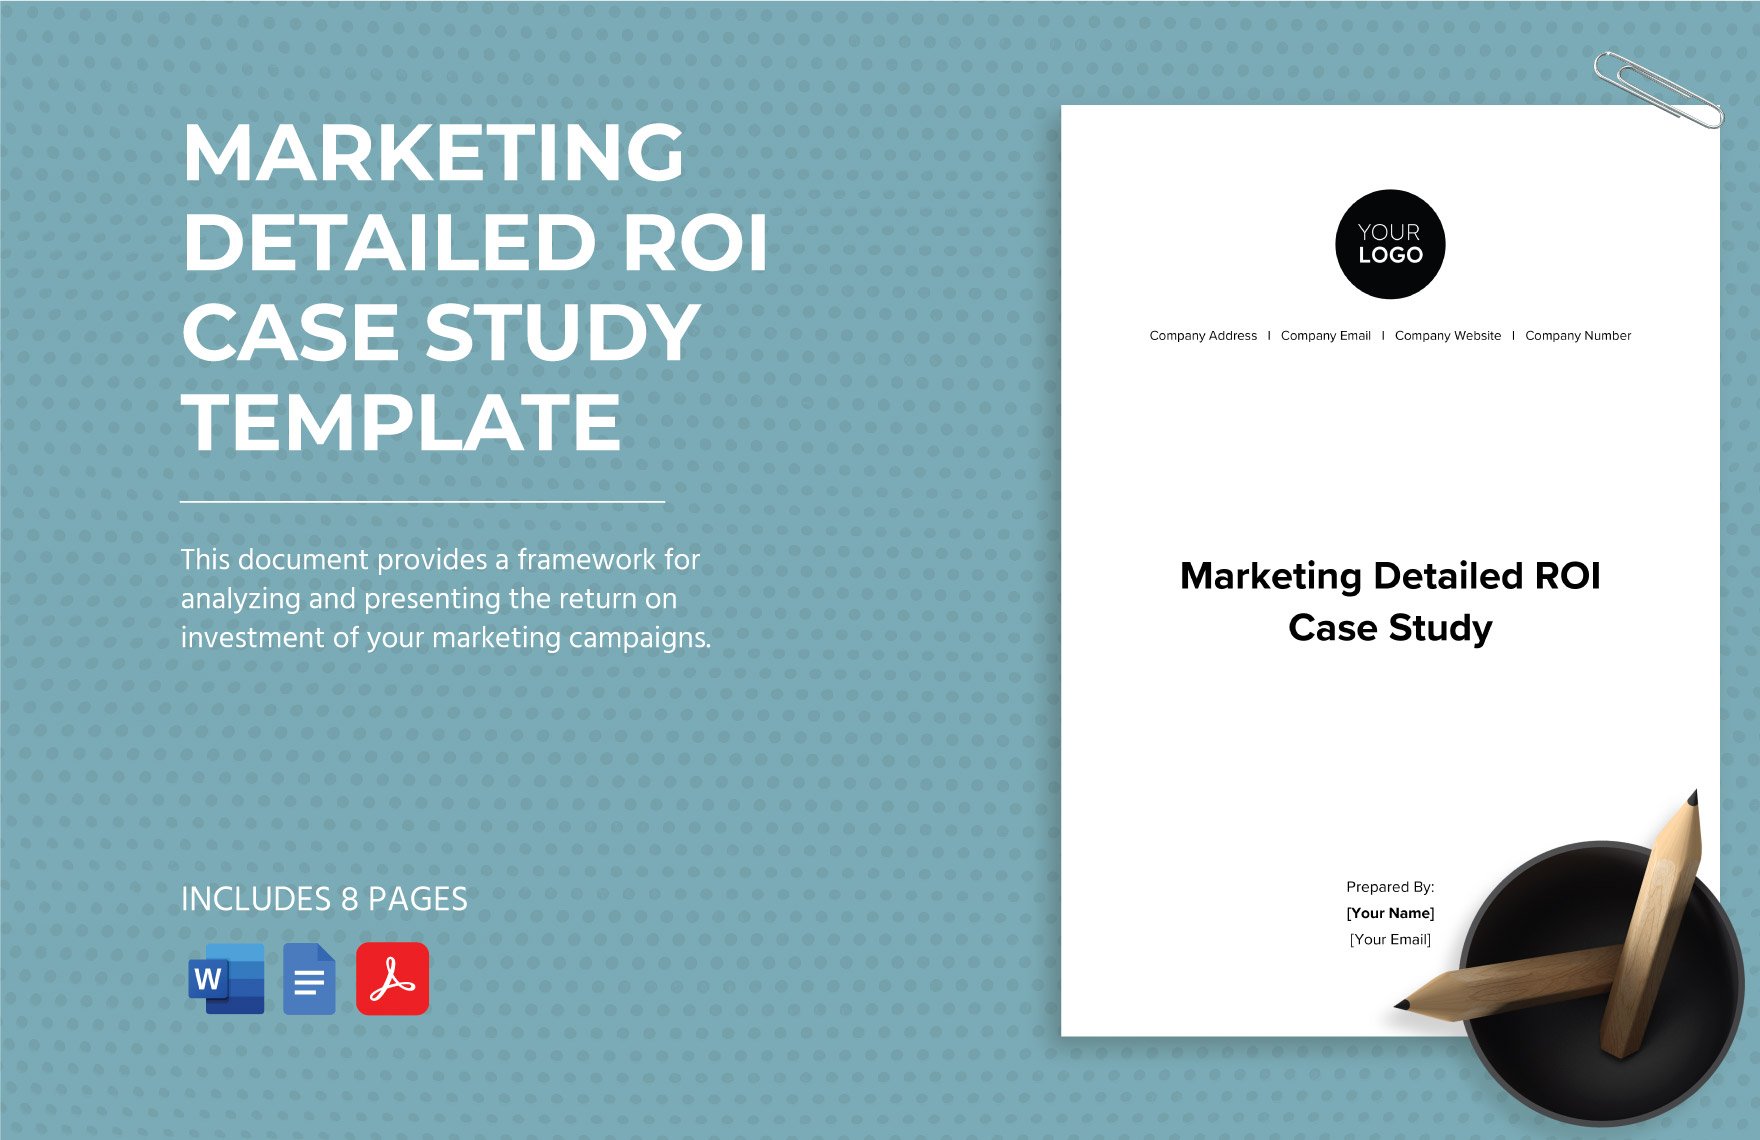 Marketing Detailed ROI Case Study Template